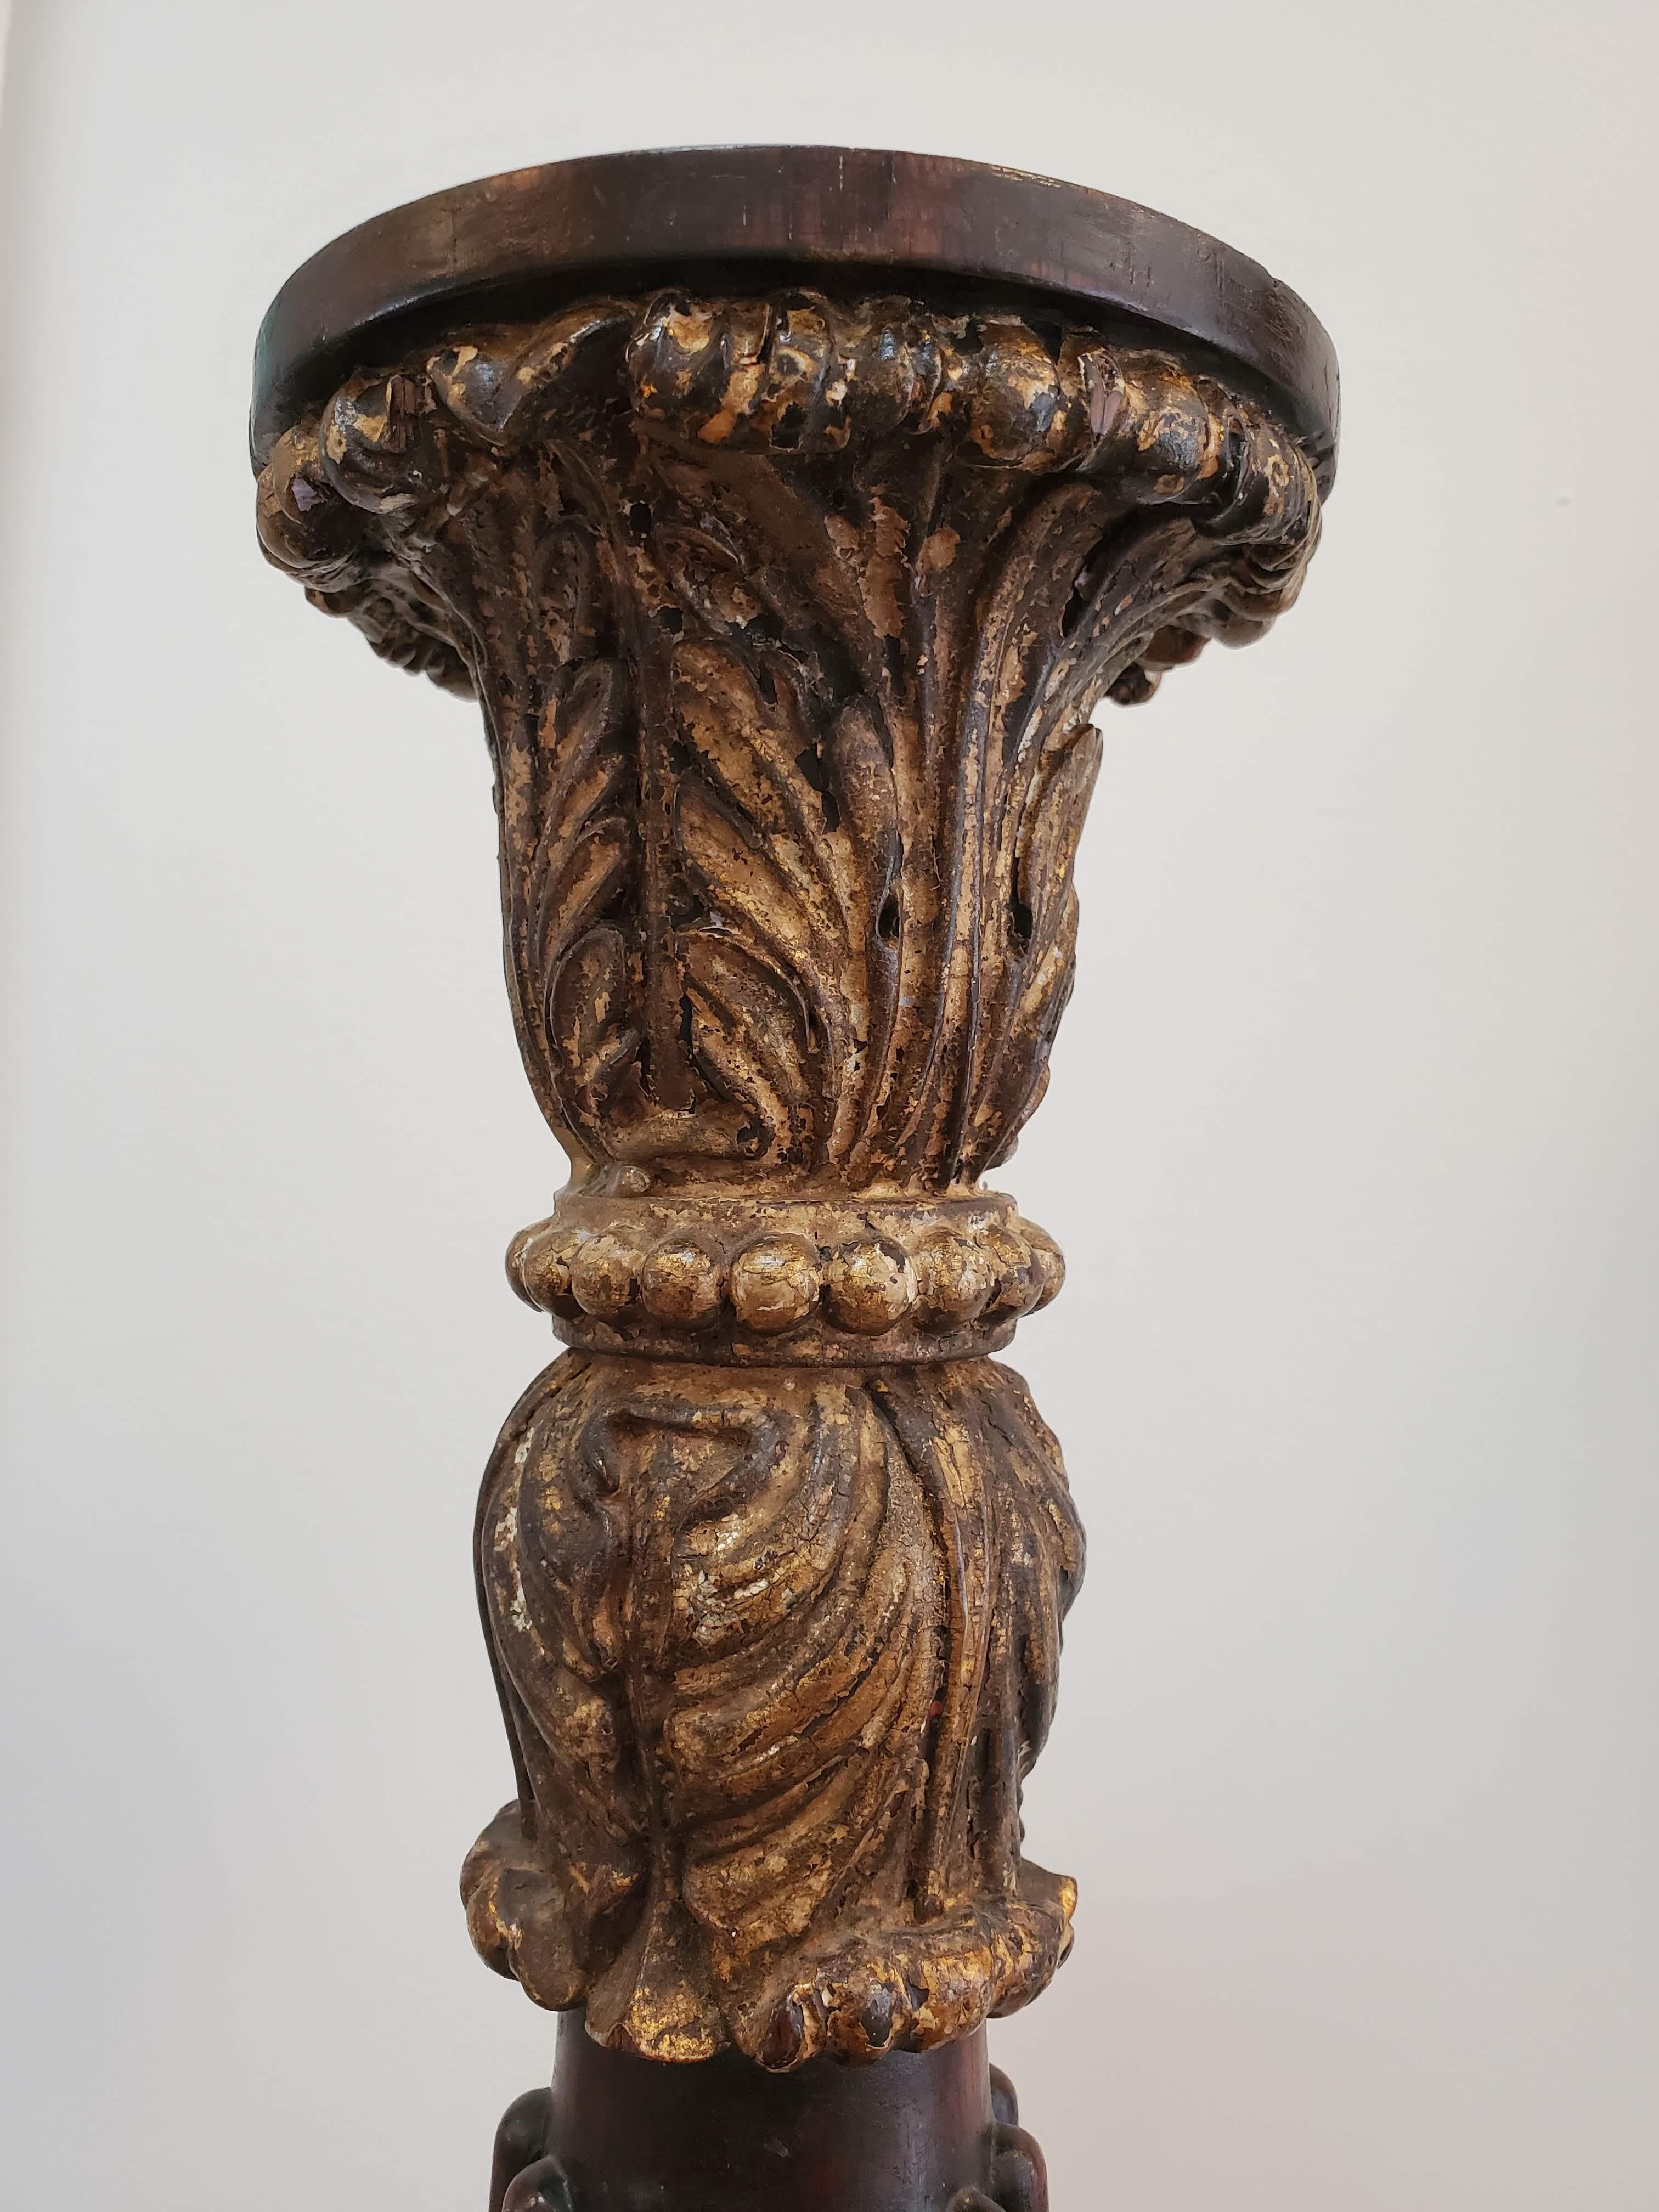 18th century English column made of Cuban mahogany with decorative edging and intricately carved capital. Base retains the original water gilding.
England, circa 1740
Measures: 32.5